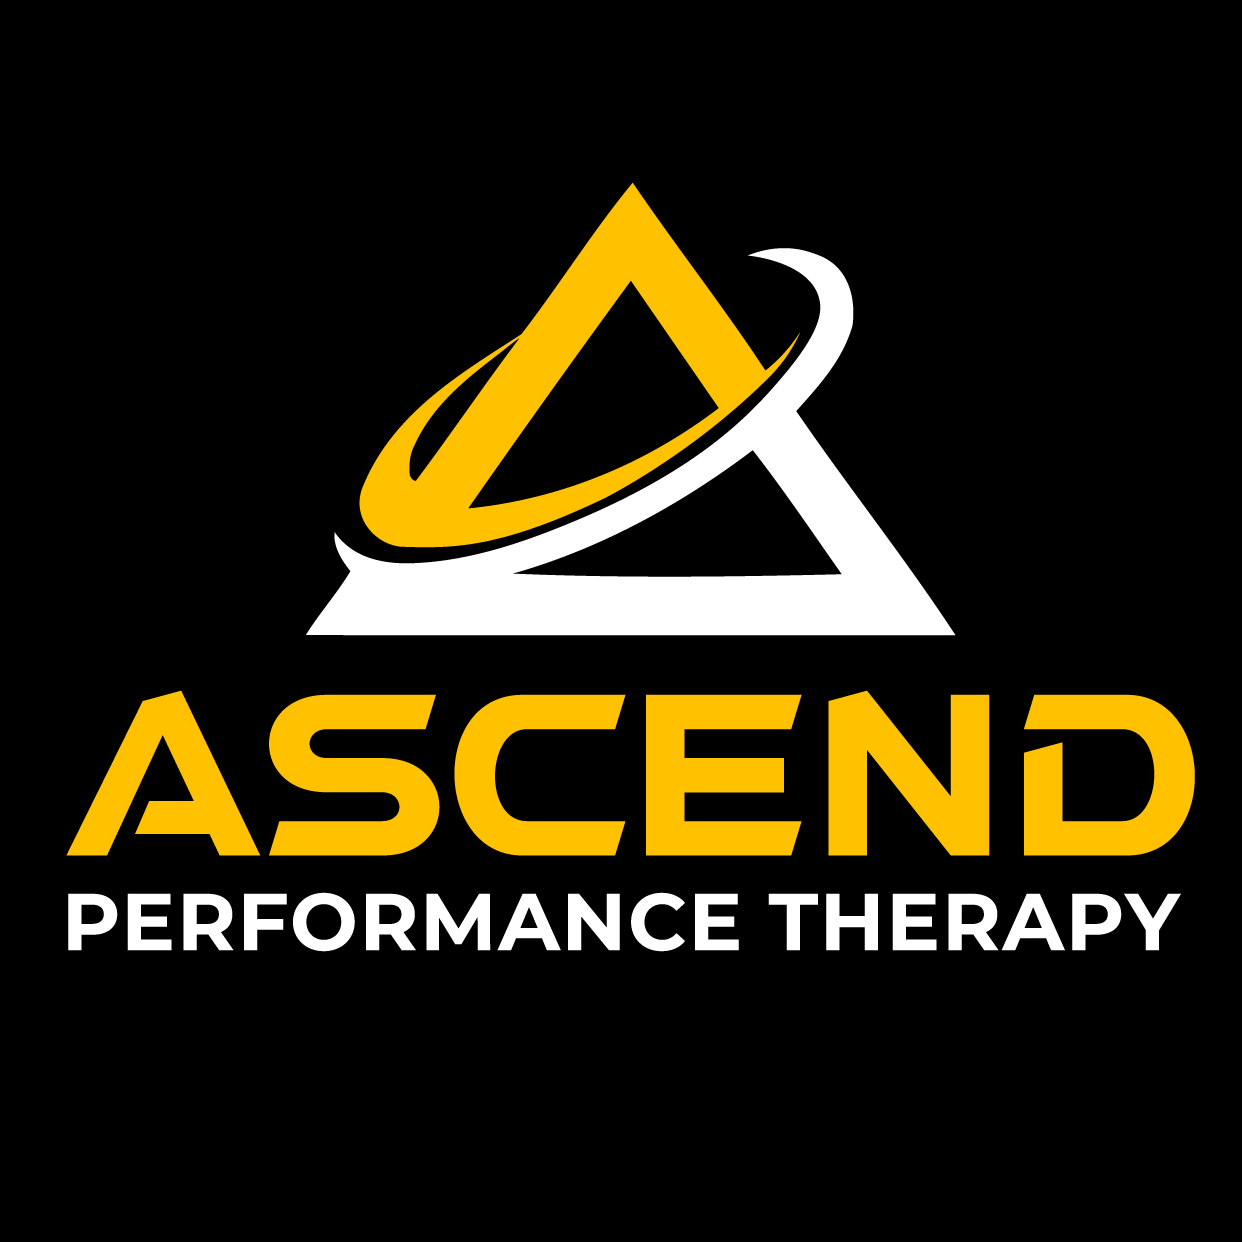 Ascend Performance Therapy